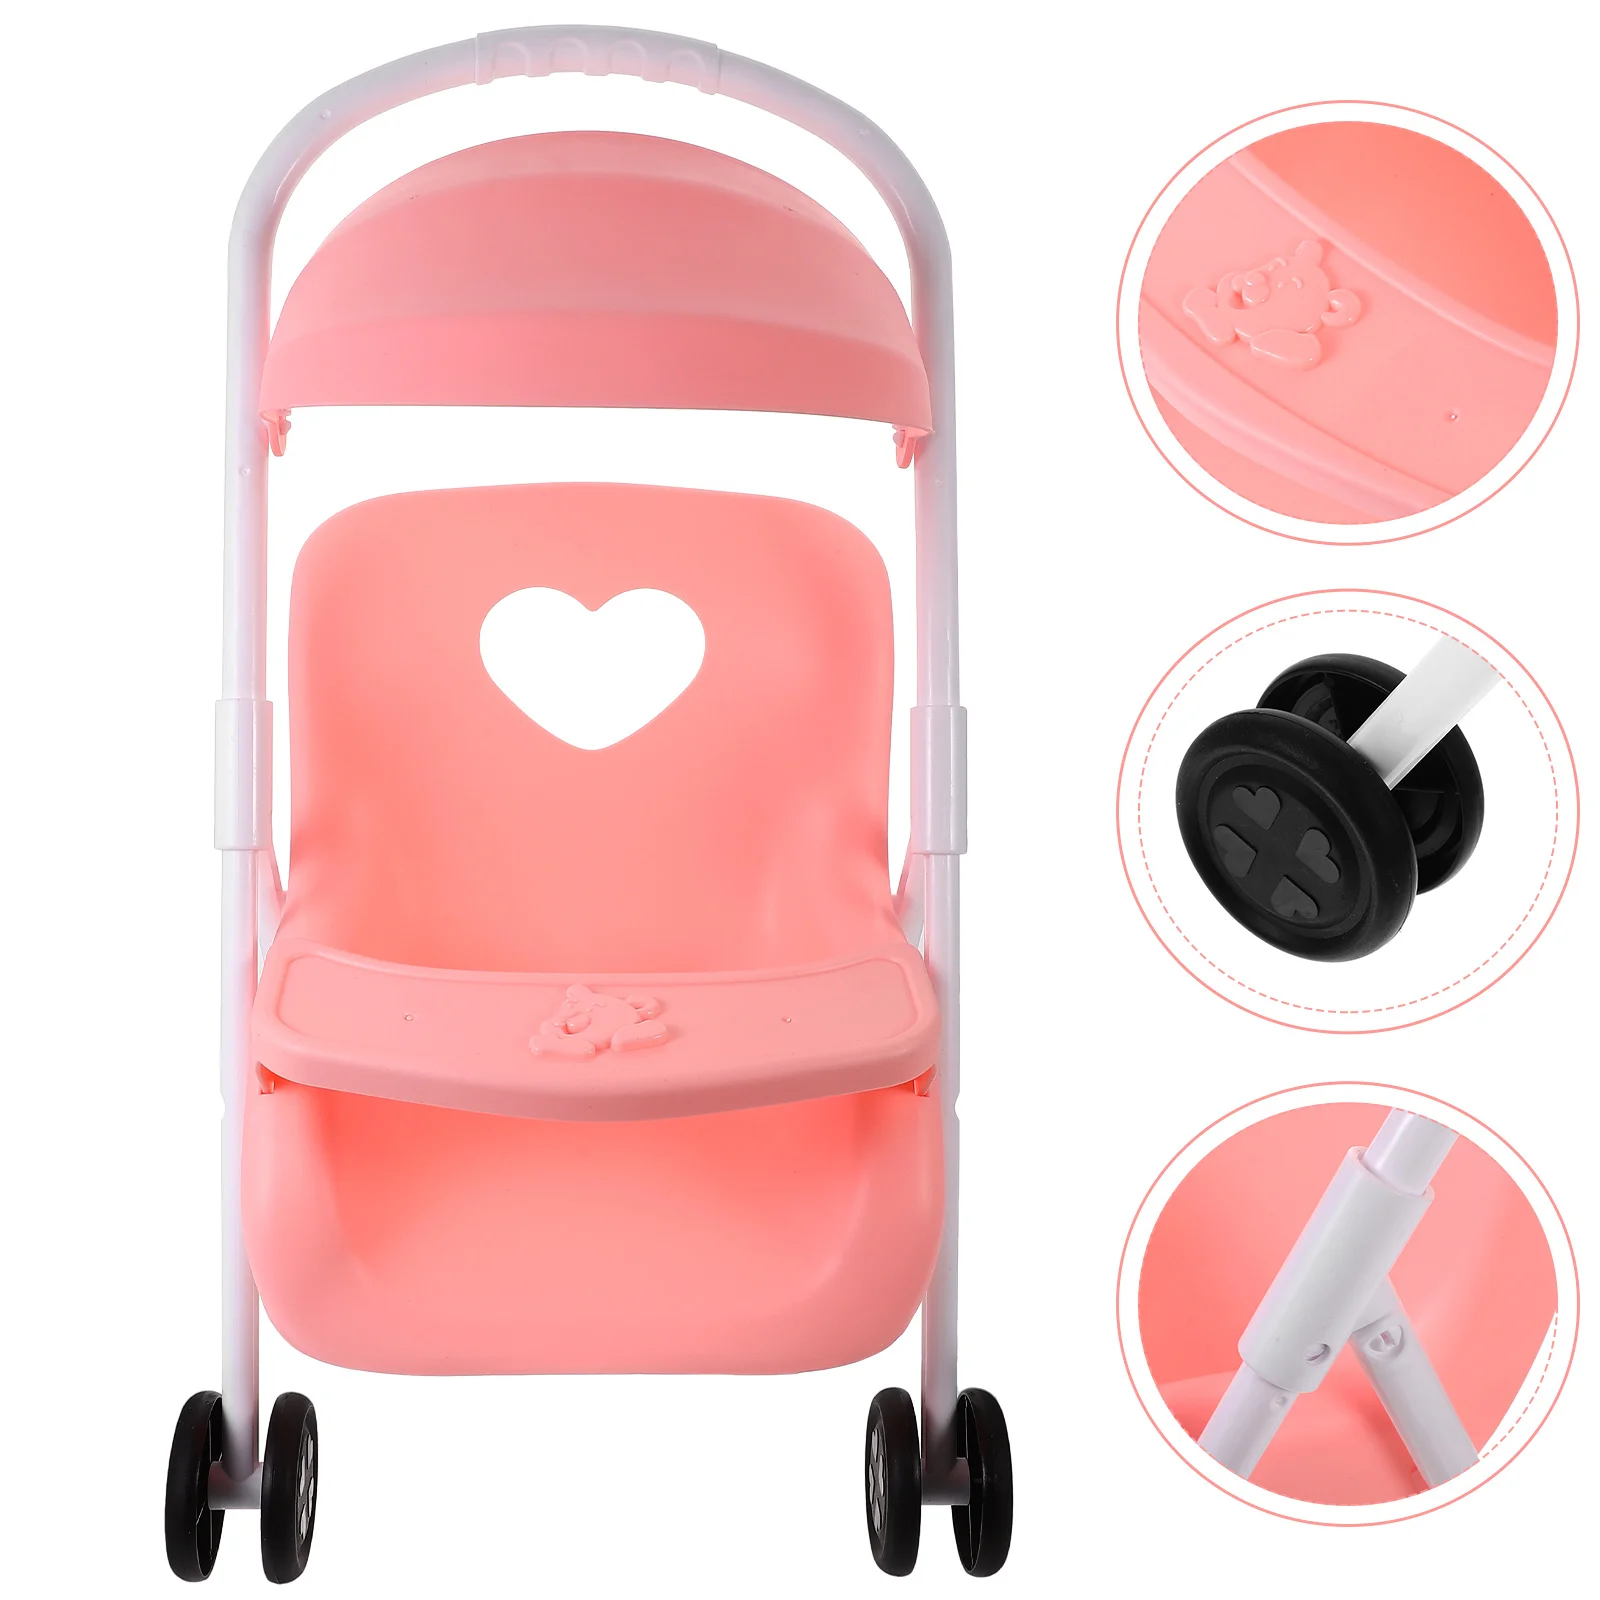 Doll Stroller Play Game Doll Stroller Simulated Play Game Stroller Furniture Adornment Children Role Playing Game for Dollhouse children s electric motorcycle tricycle kids toys baby recharge double drive stroller large seated motorbike 1 6 years old